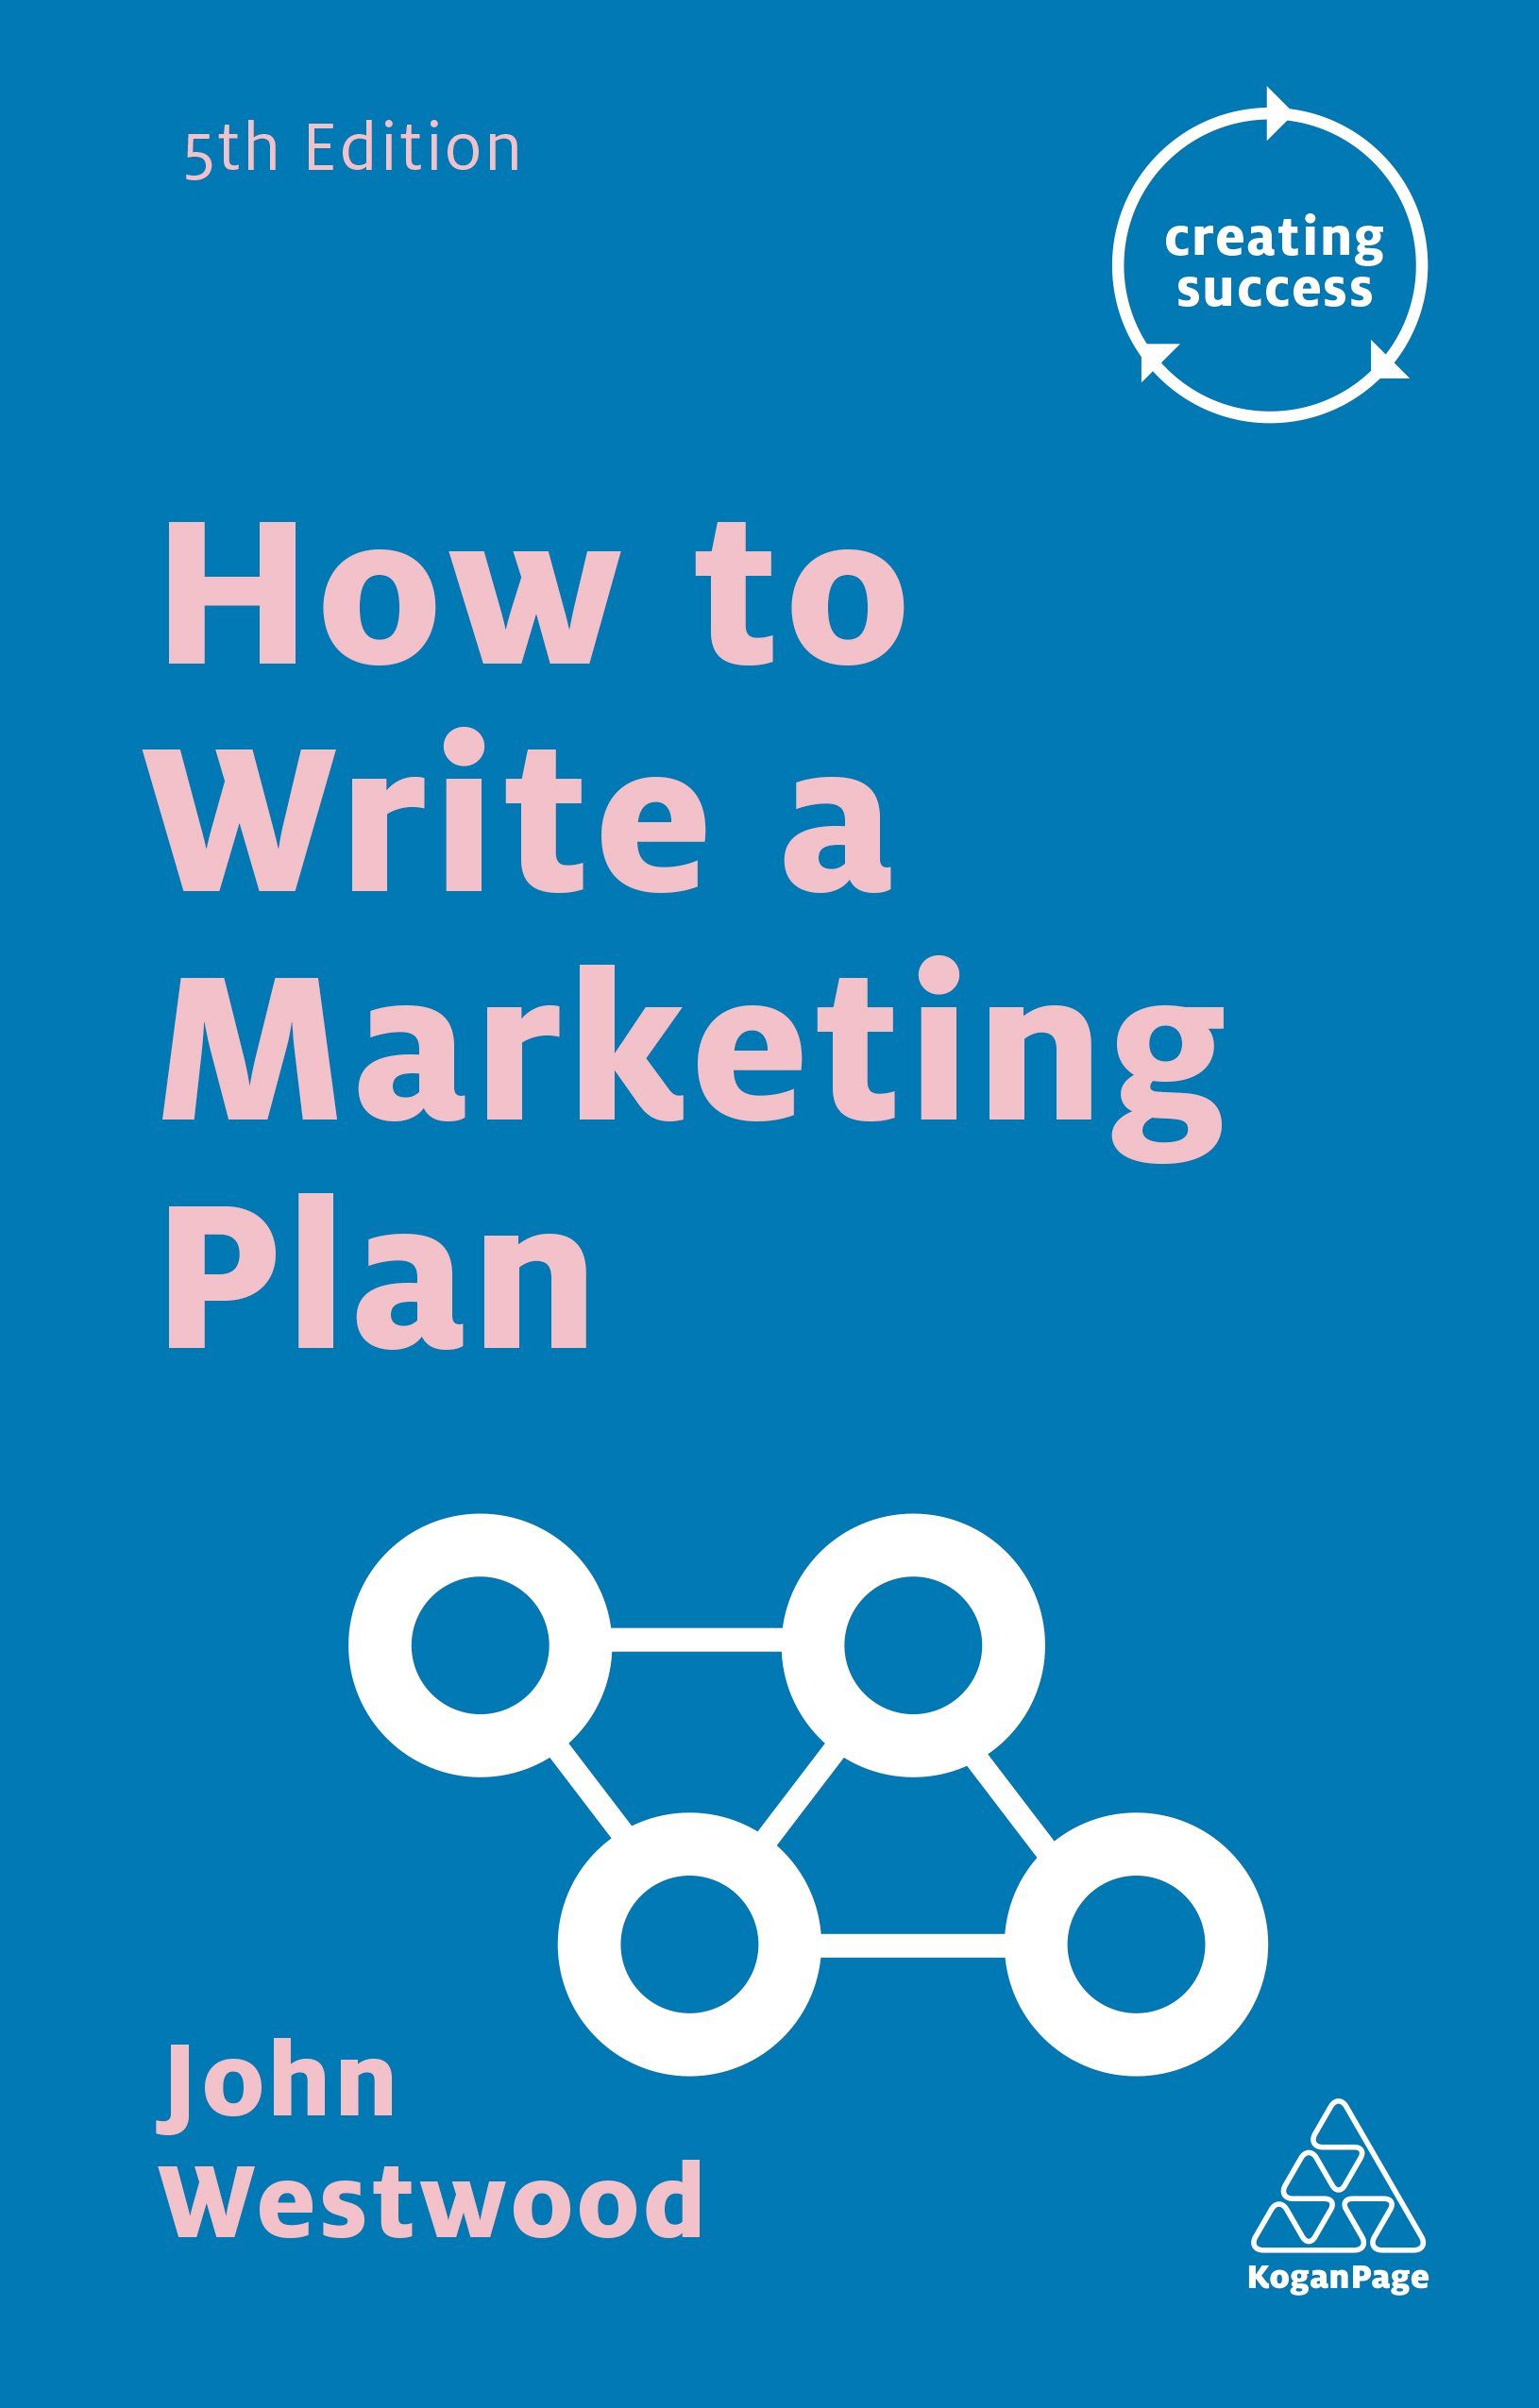 How to Write a Marketing Plan by John Westwood